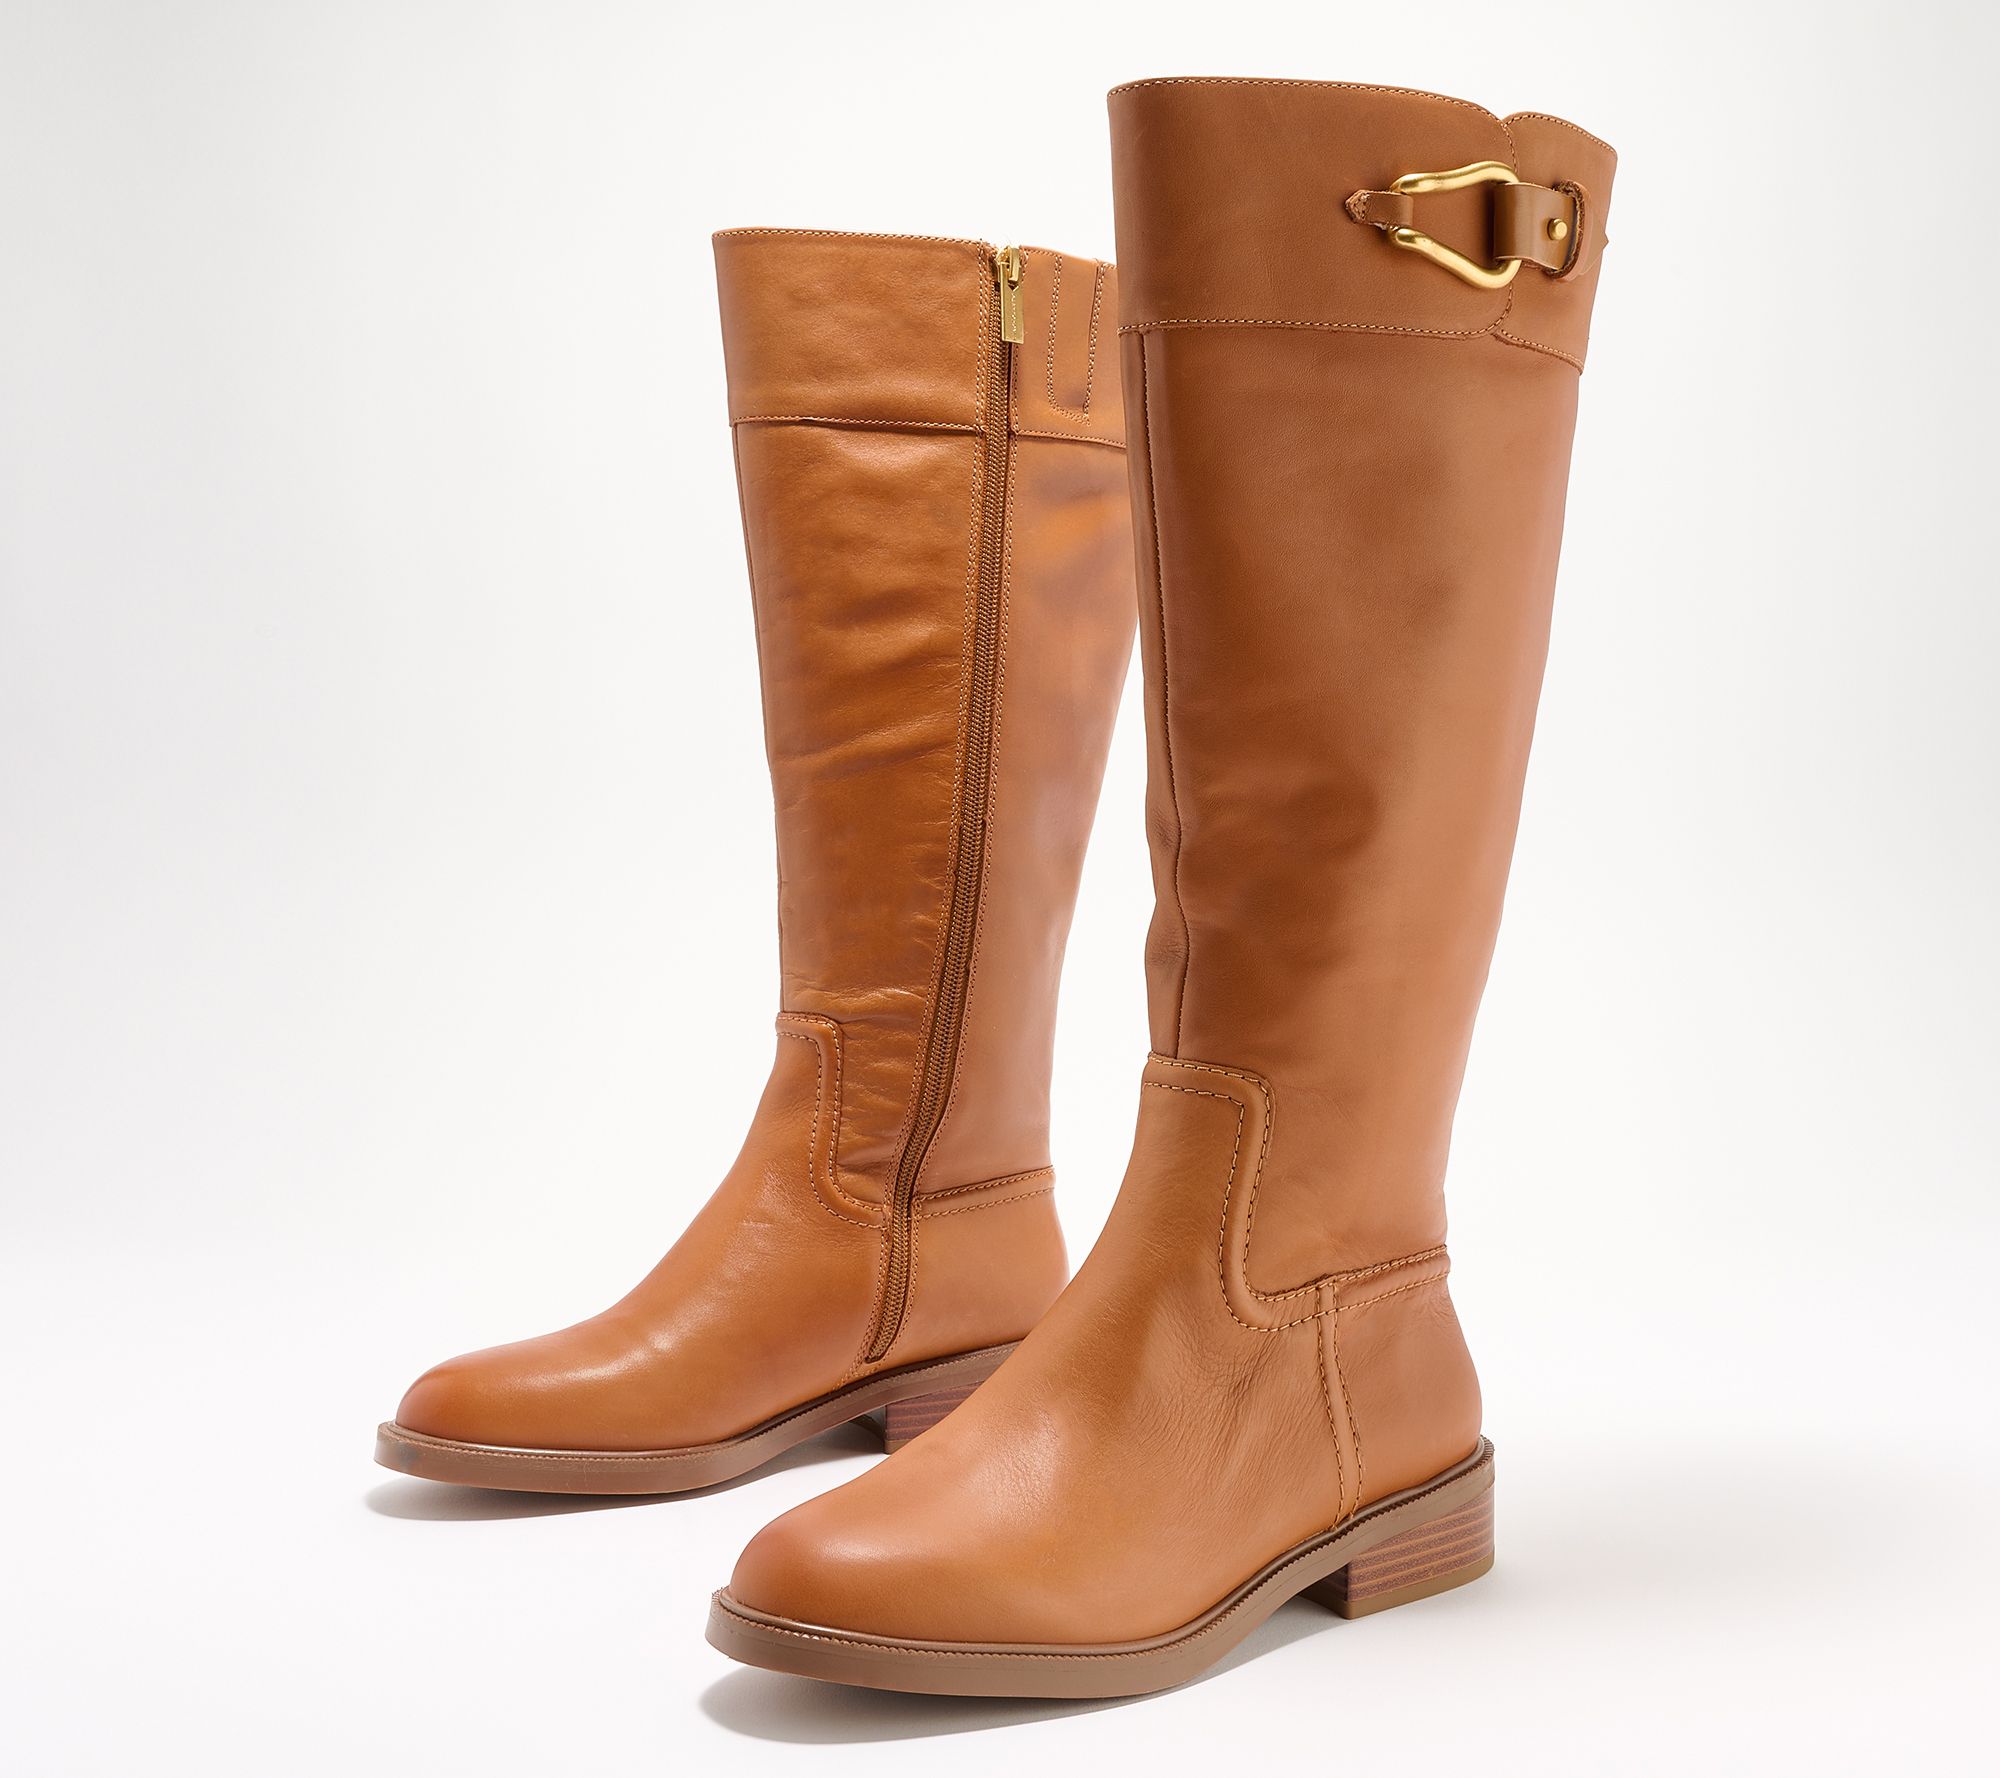 Vince Camuto Leather Riding Boots - Andalian